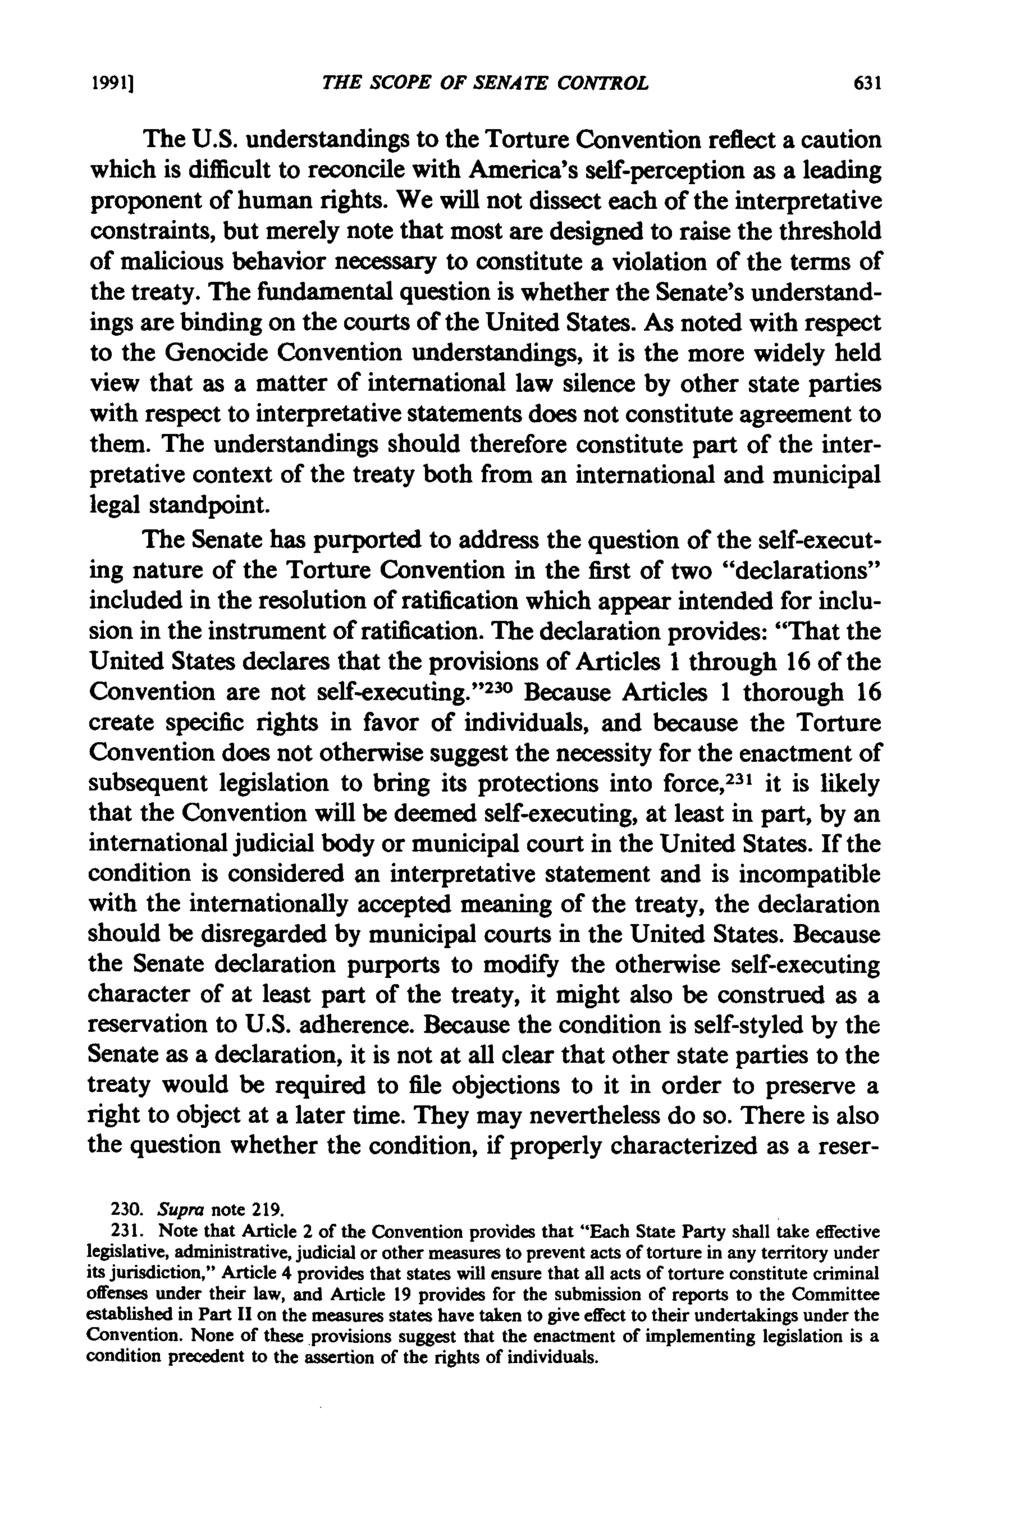 1991] THE SCOPE OF SENATE CONTROL The U.S. understandings to the Torture Convention reflect a caution which is difficult to reconcile with America's self-perception as a leading proponent of human rights.